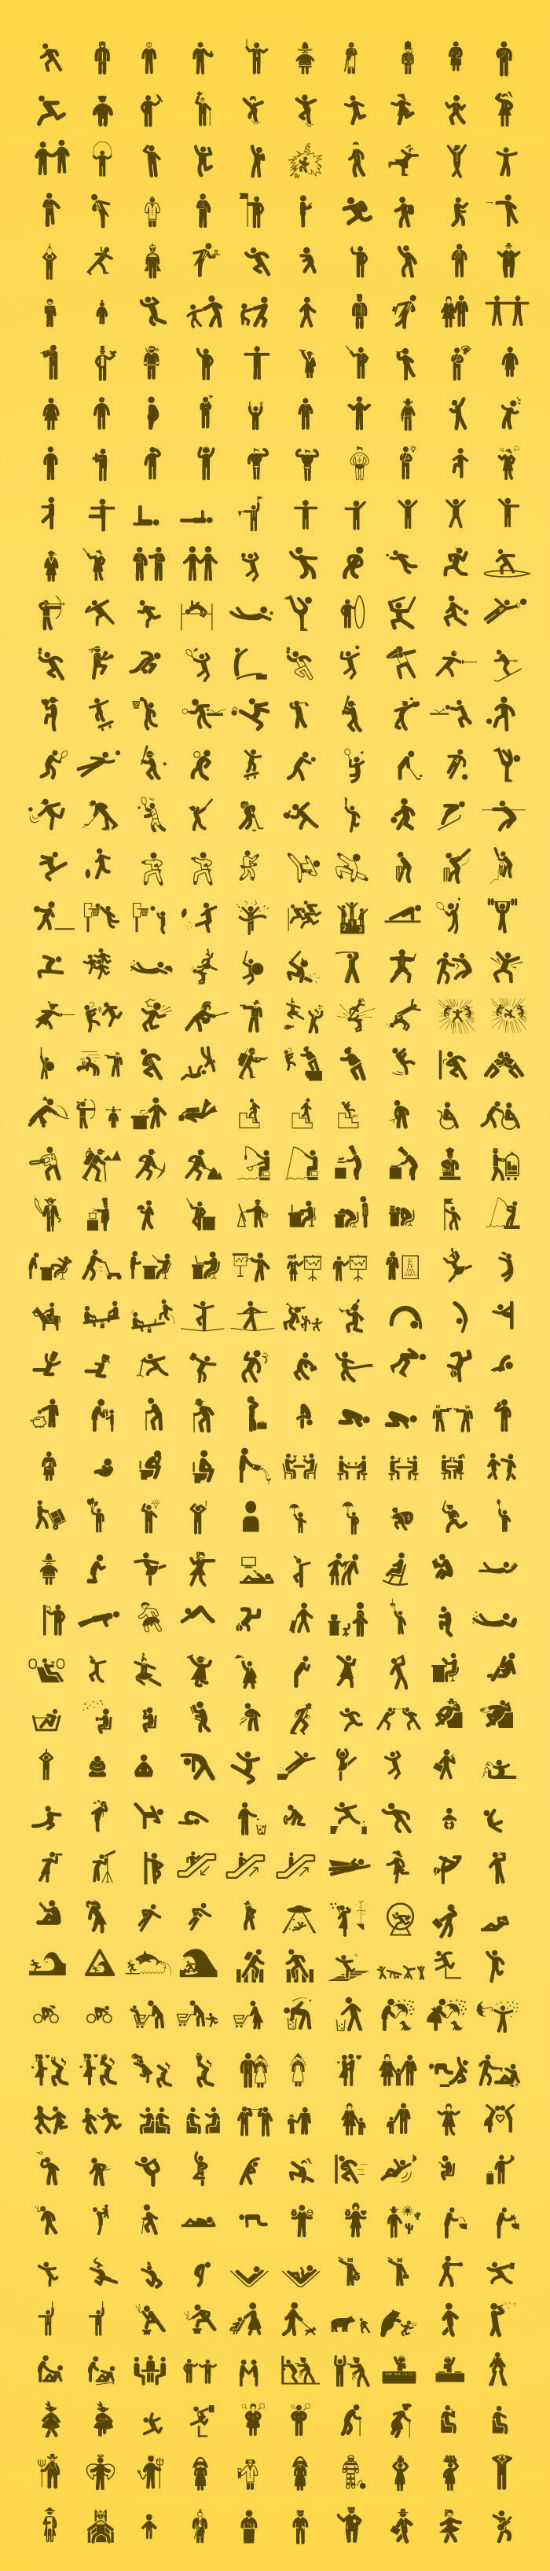 human-pictos-overview